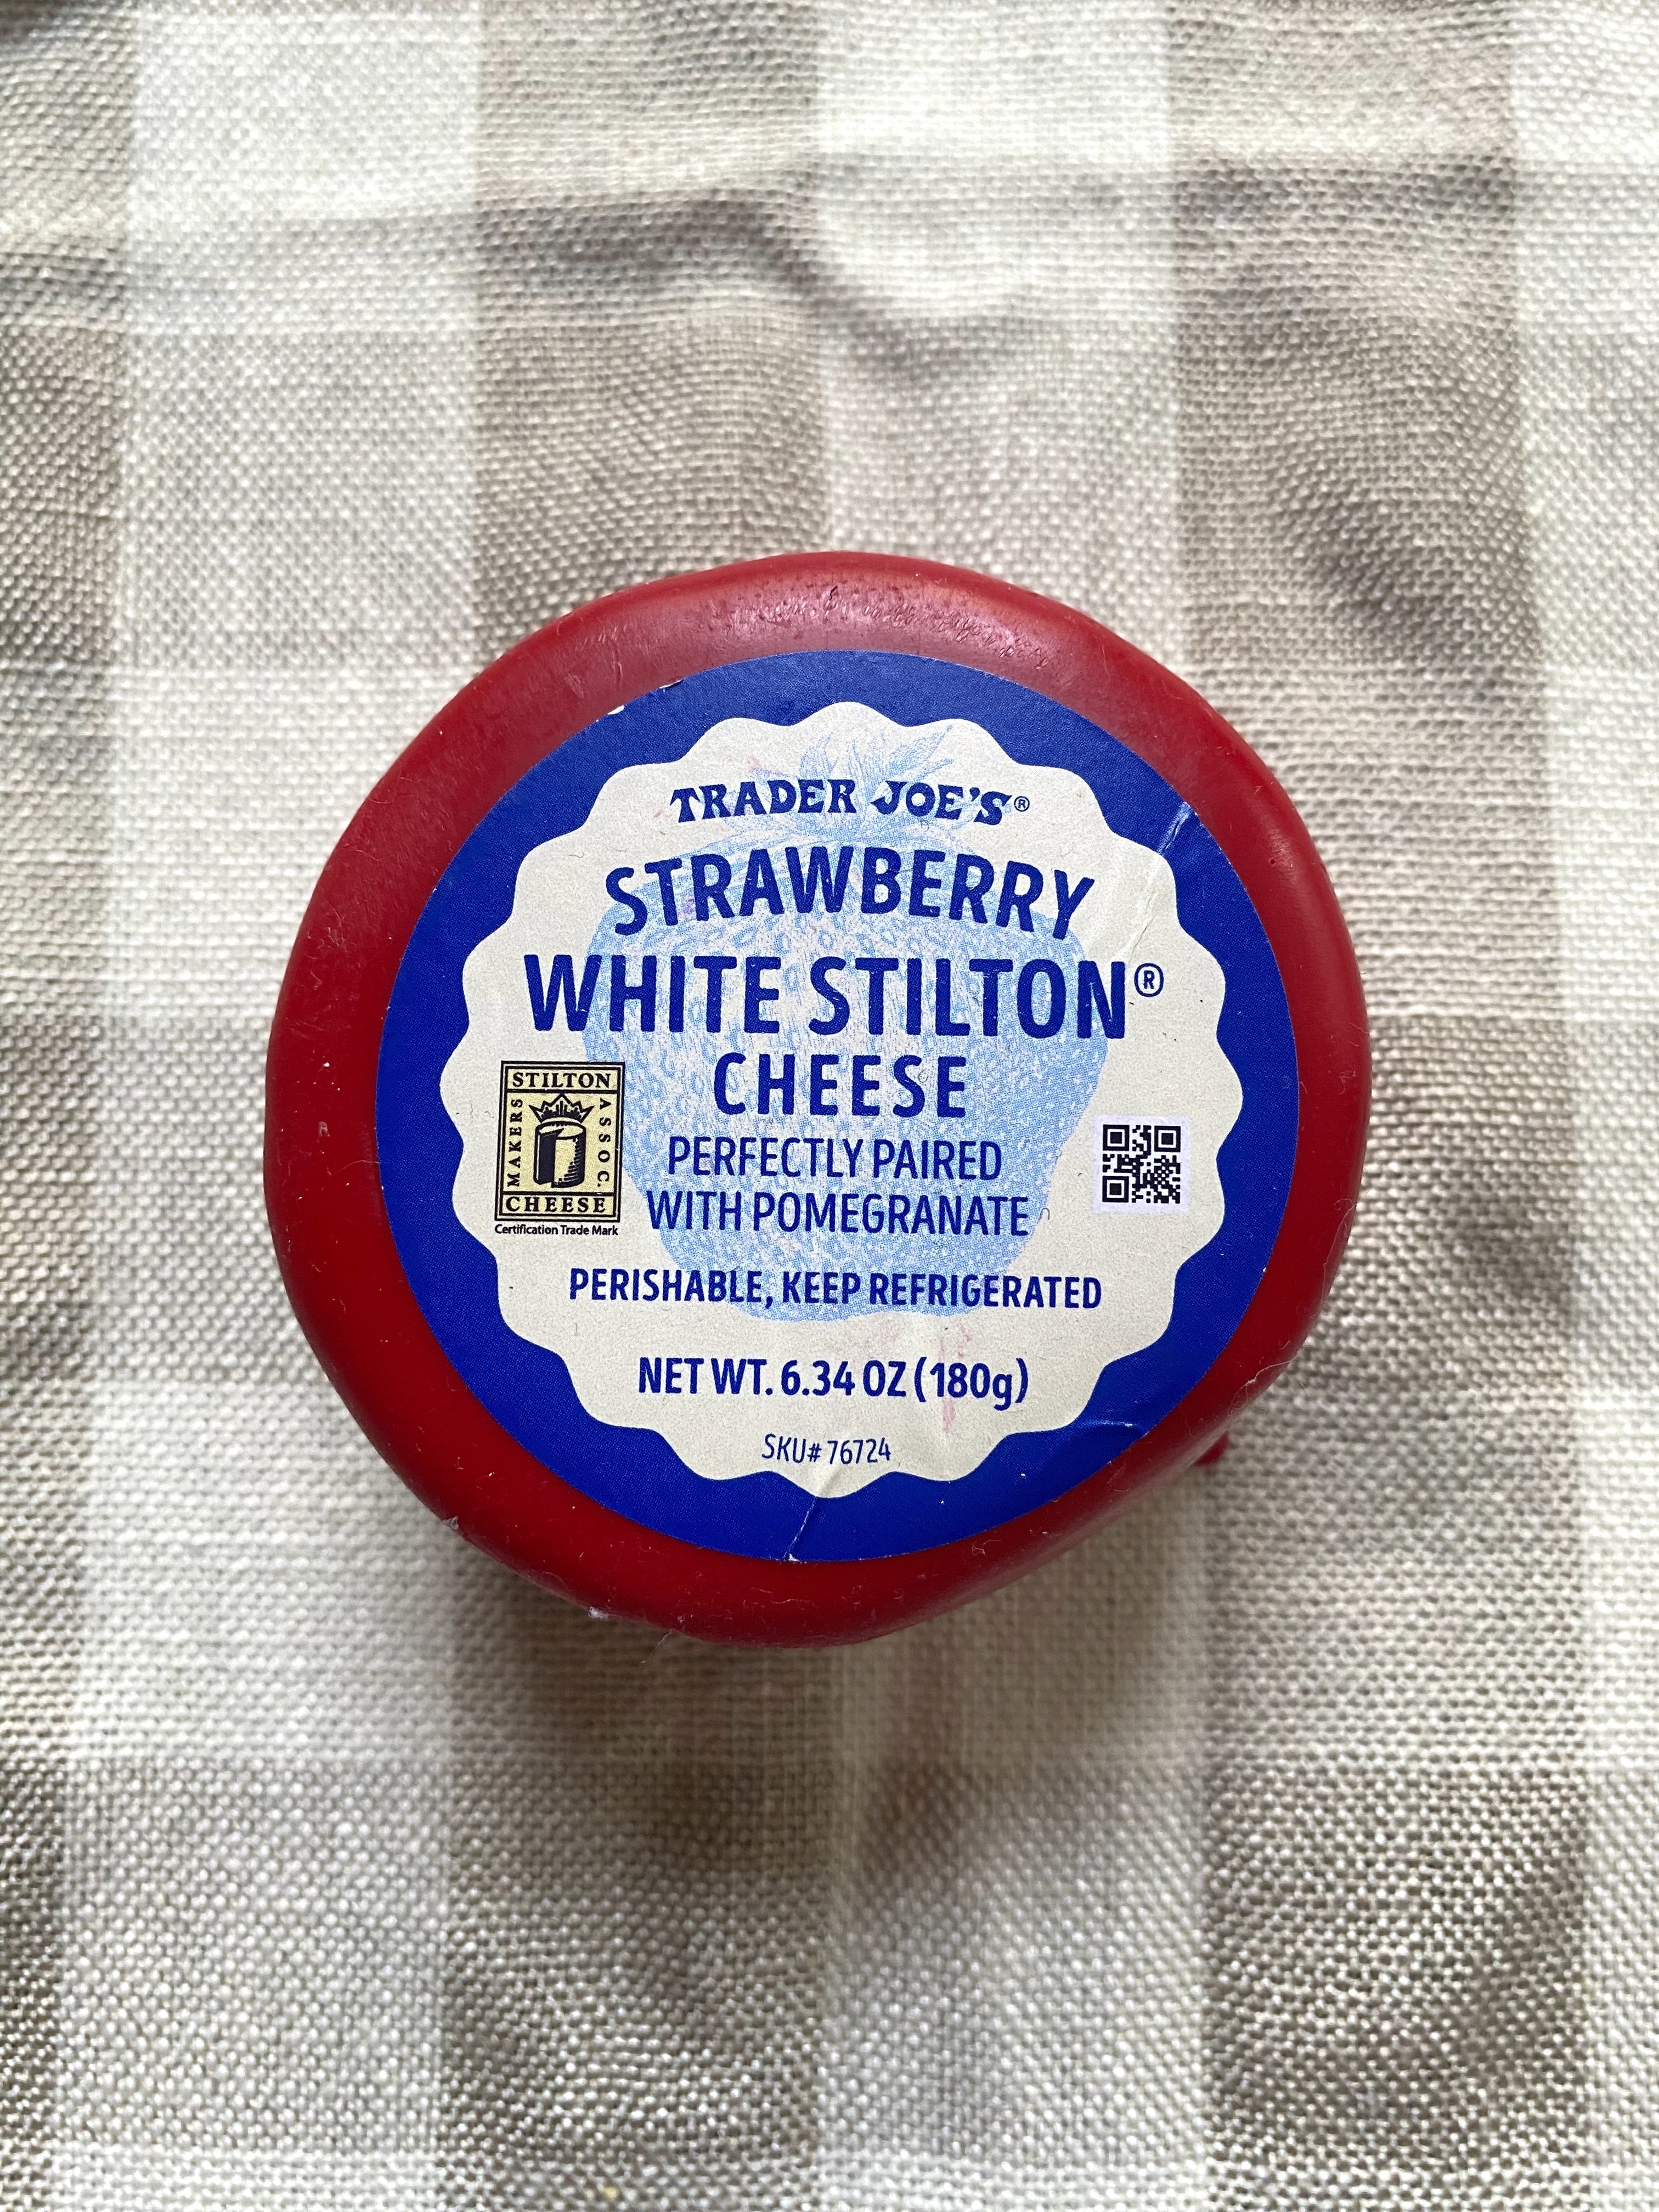 A wheel of strawberry stilton cheese with a red wax coating